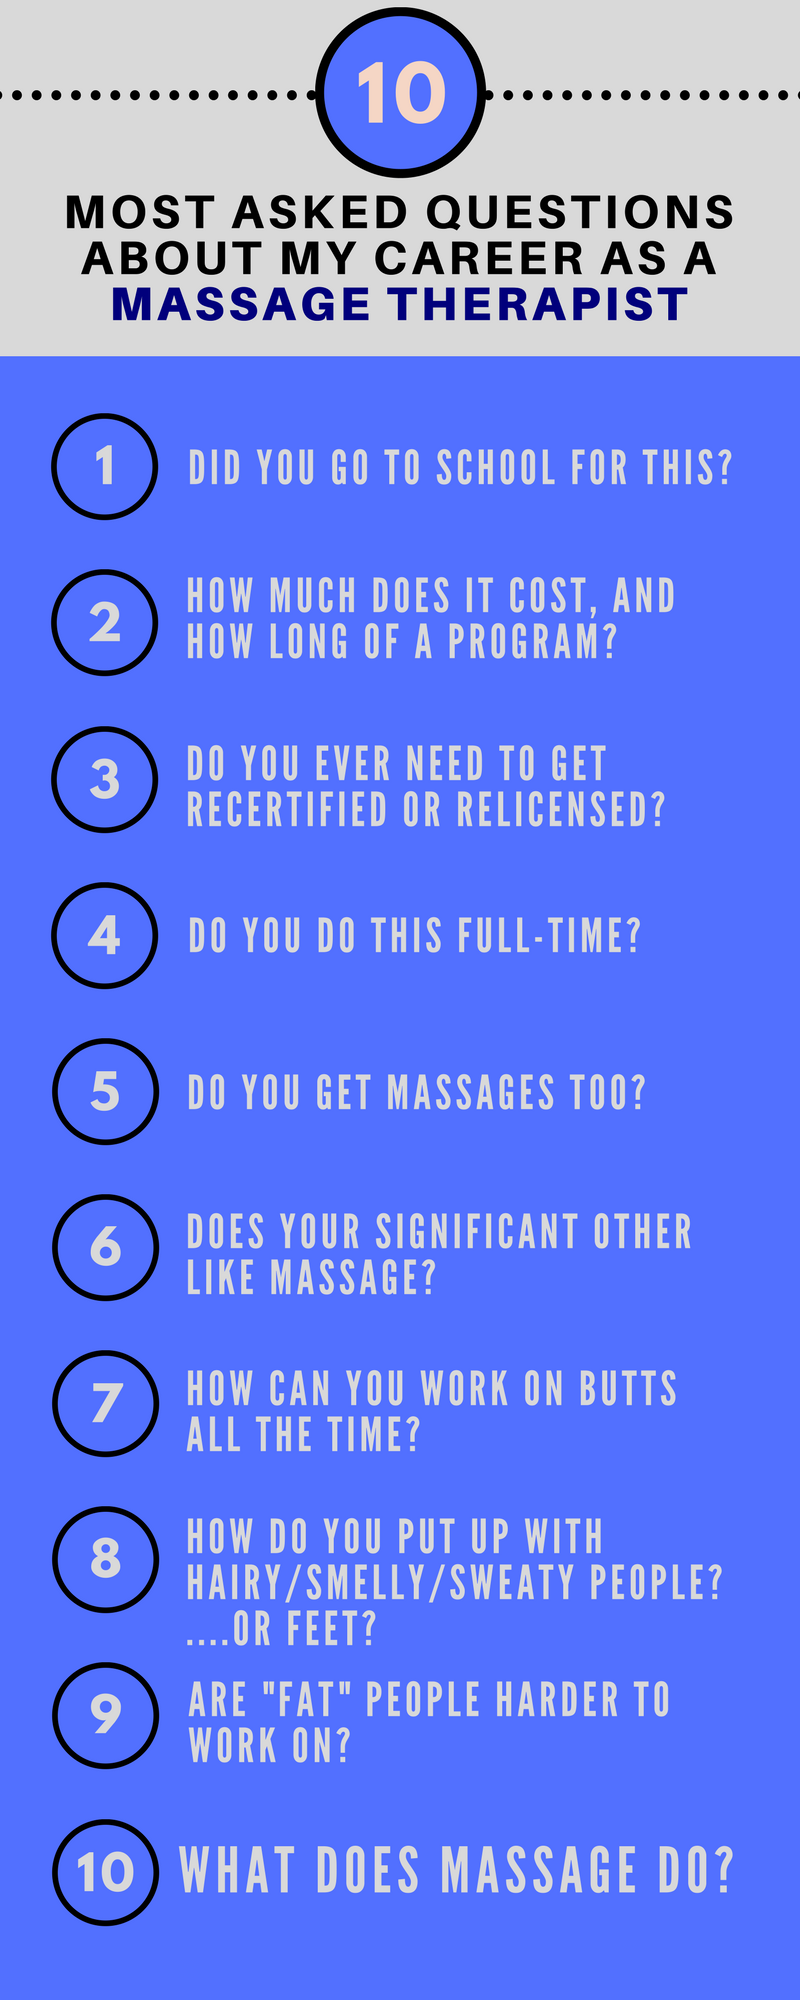 10 most asked questions about my career as a massage therapist2.png